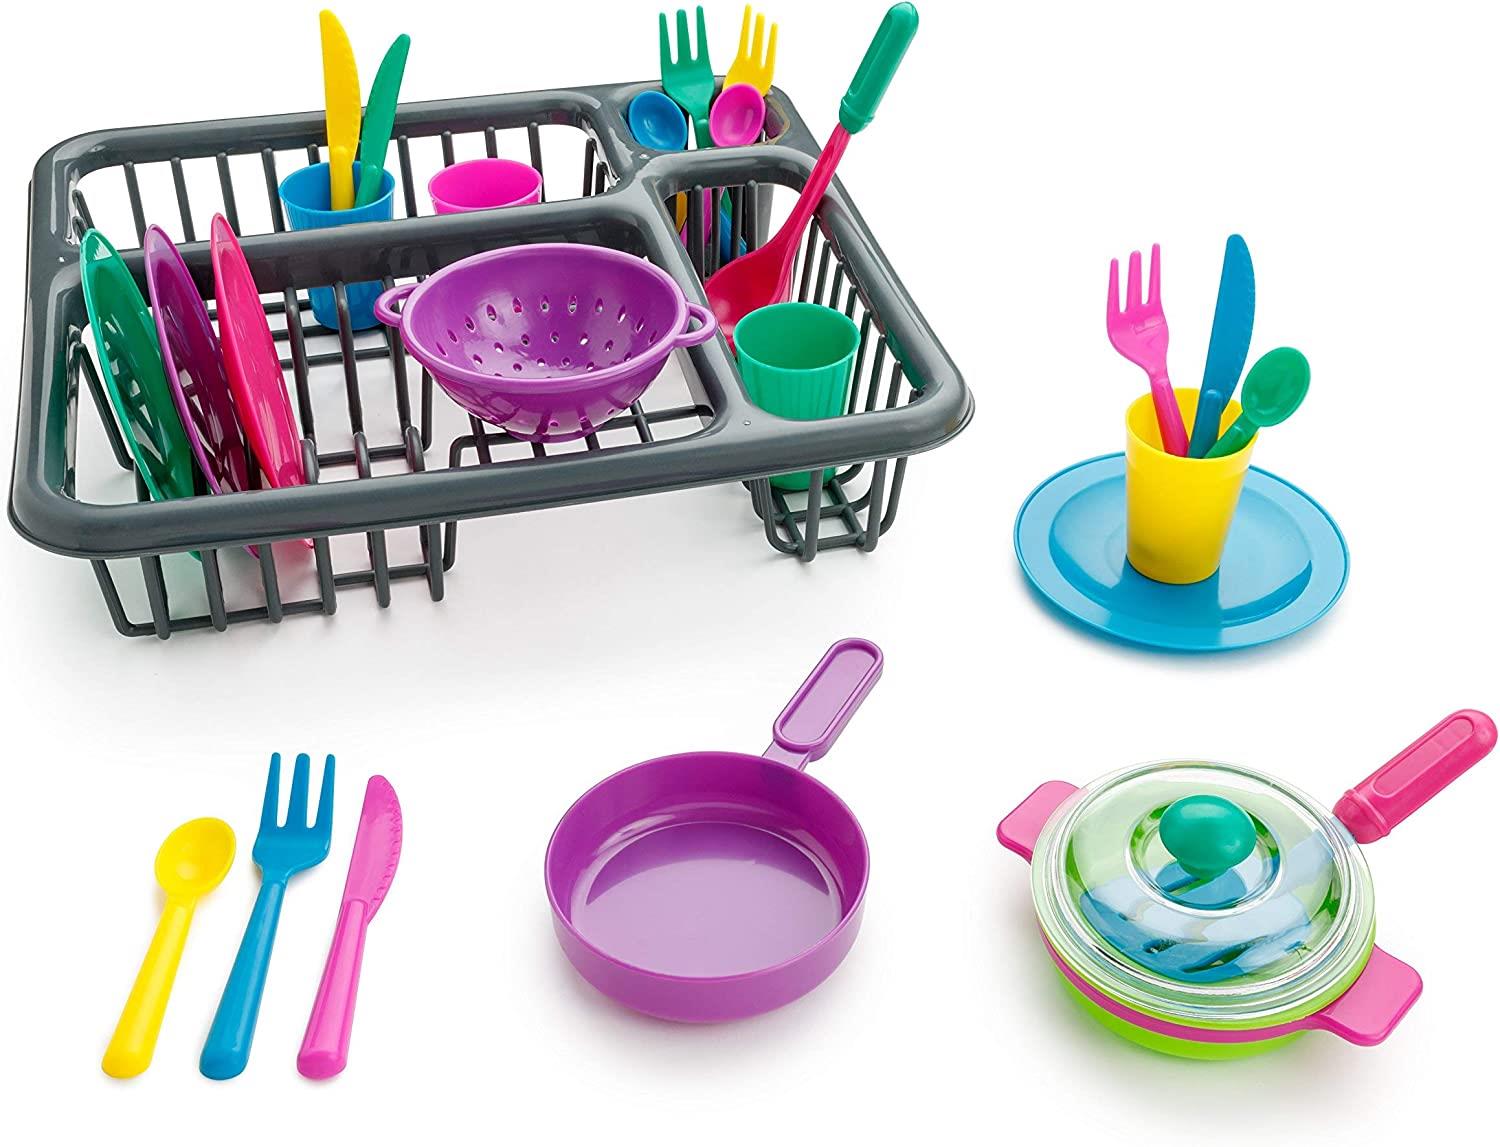 Kids Role Play Toy Set Kitchen Accessories Dish Washing Drainer 27 Pieces by The Magic Toy Shop - UKBuyZone